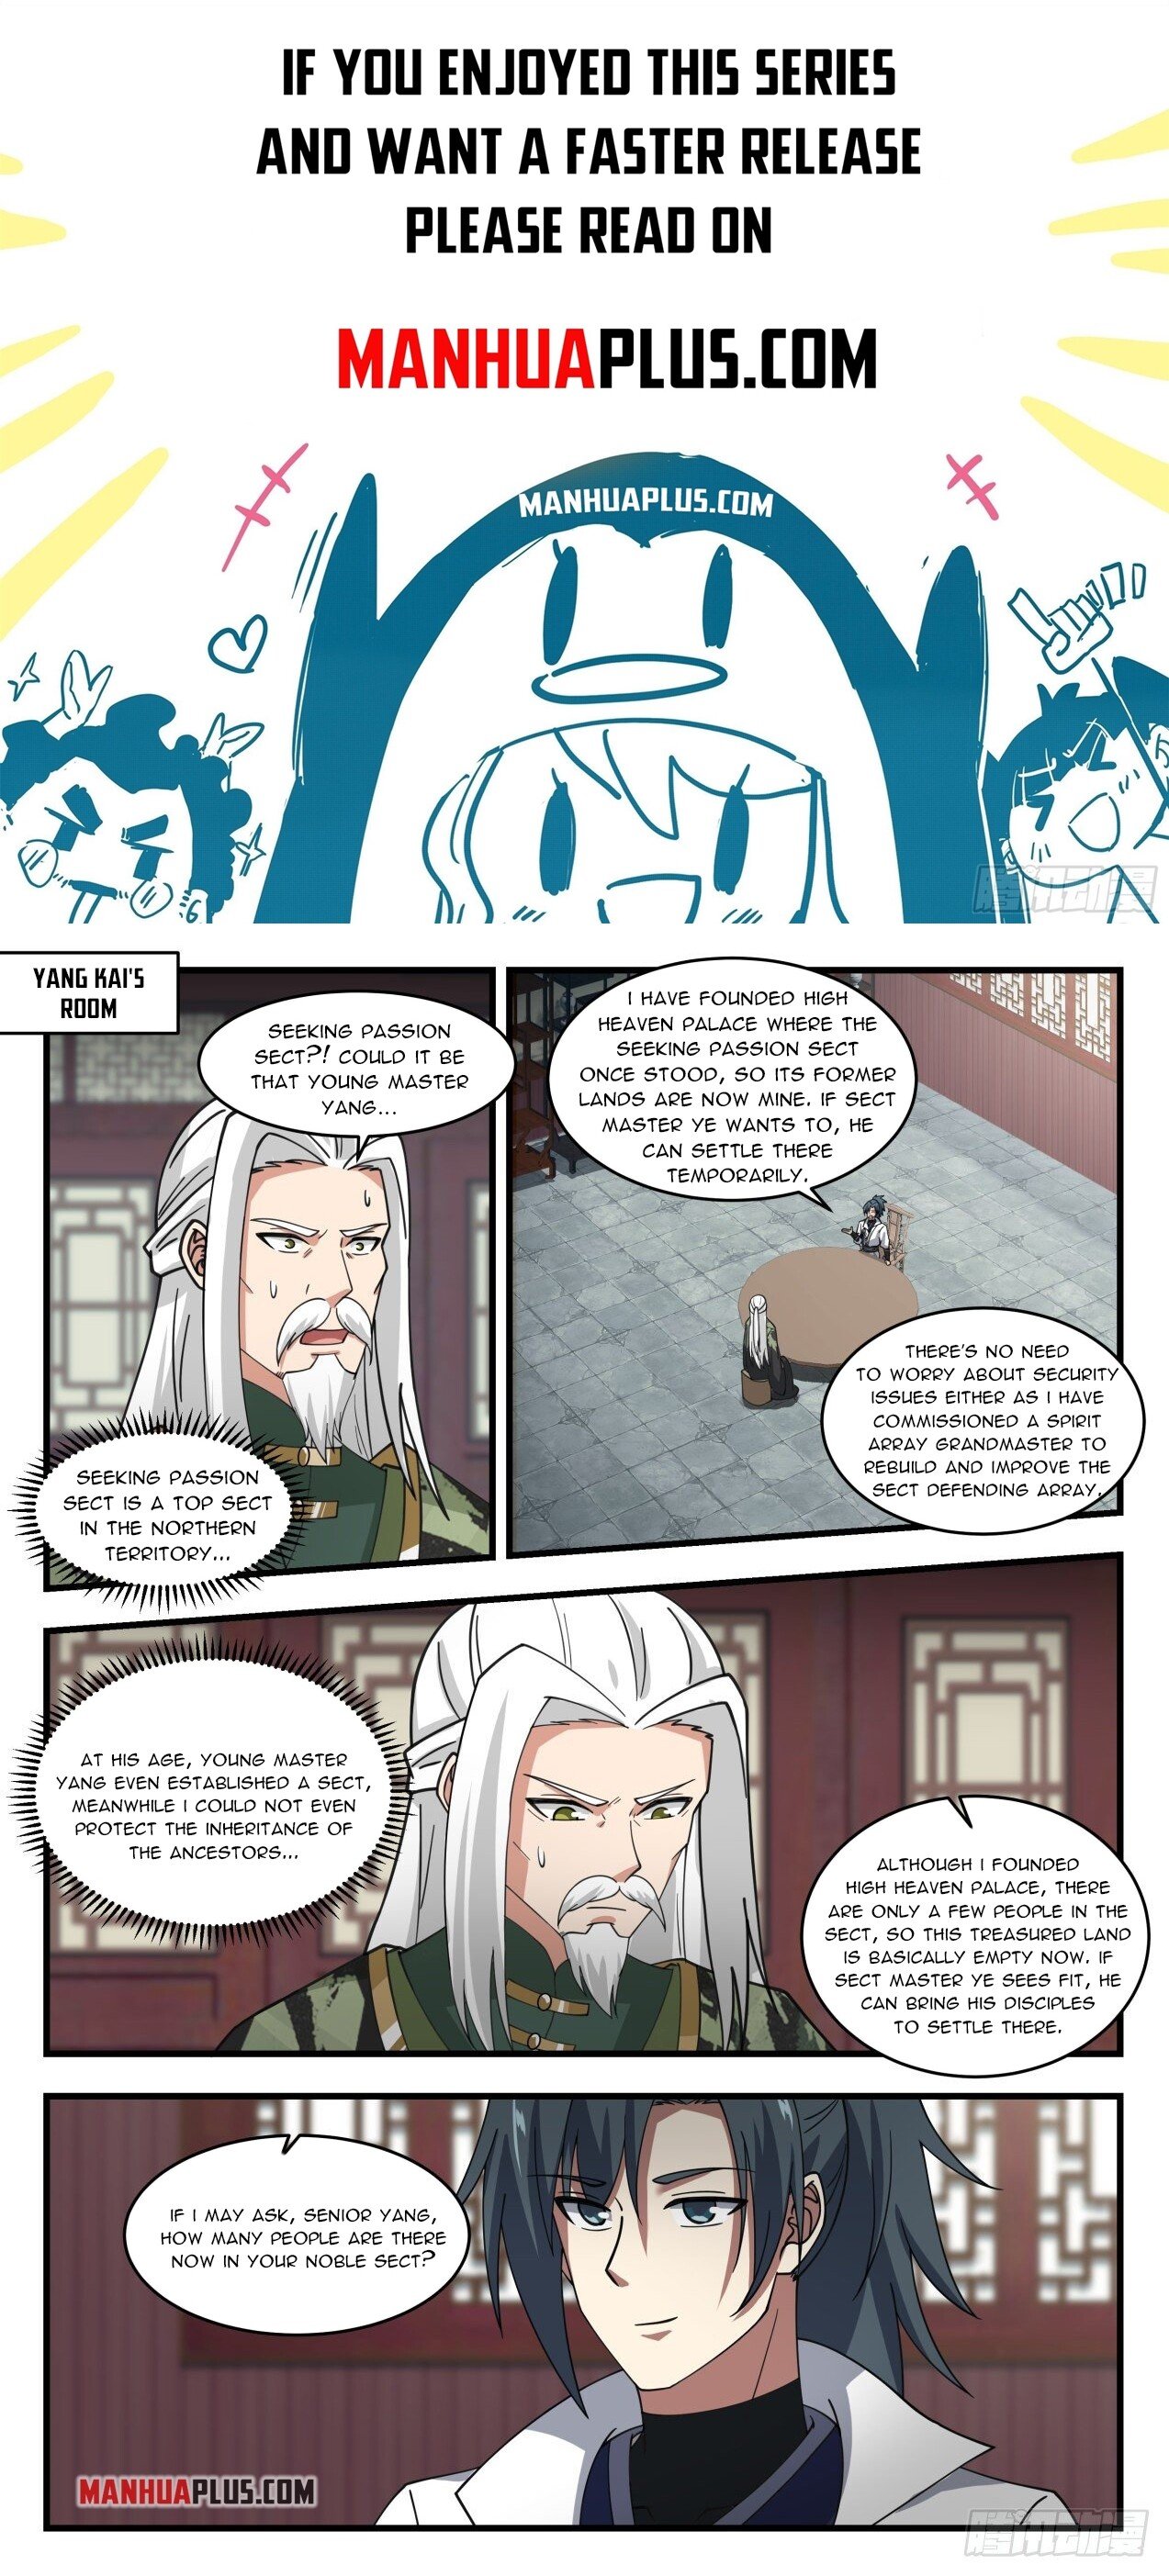 Martial Peak - Chapter 13266 - I wouldn't dare - Image 1